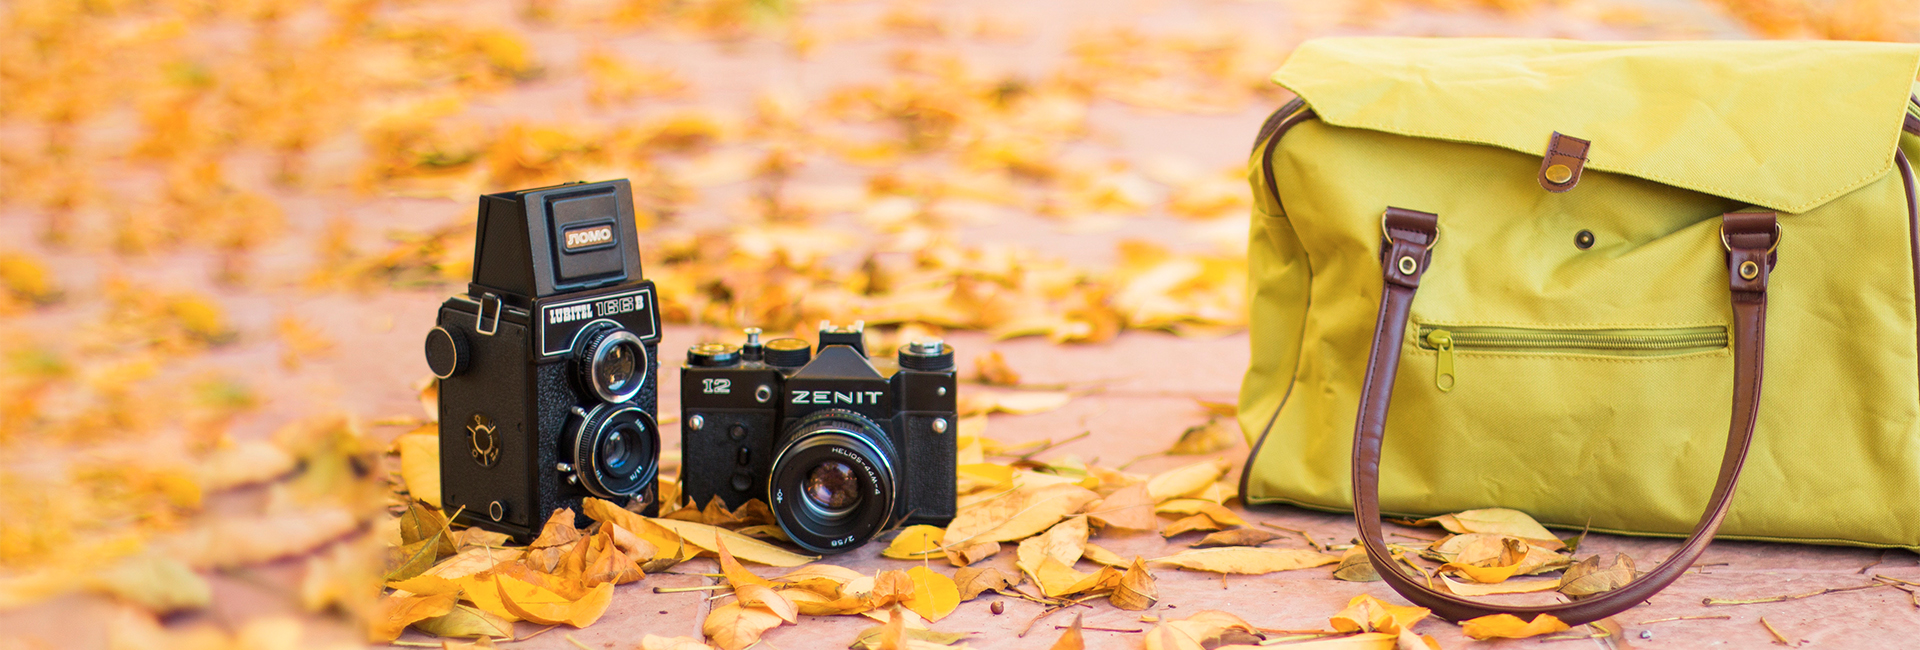 cameras-and-yellow-tote-bag-fall-leaves